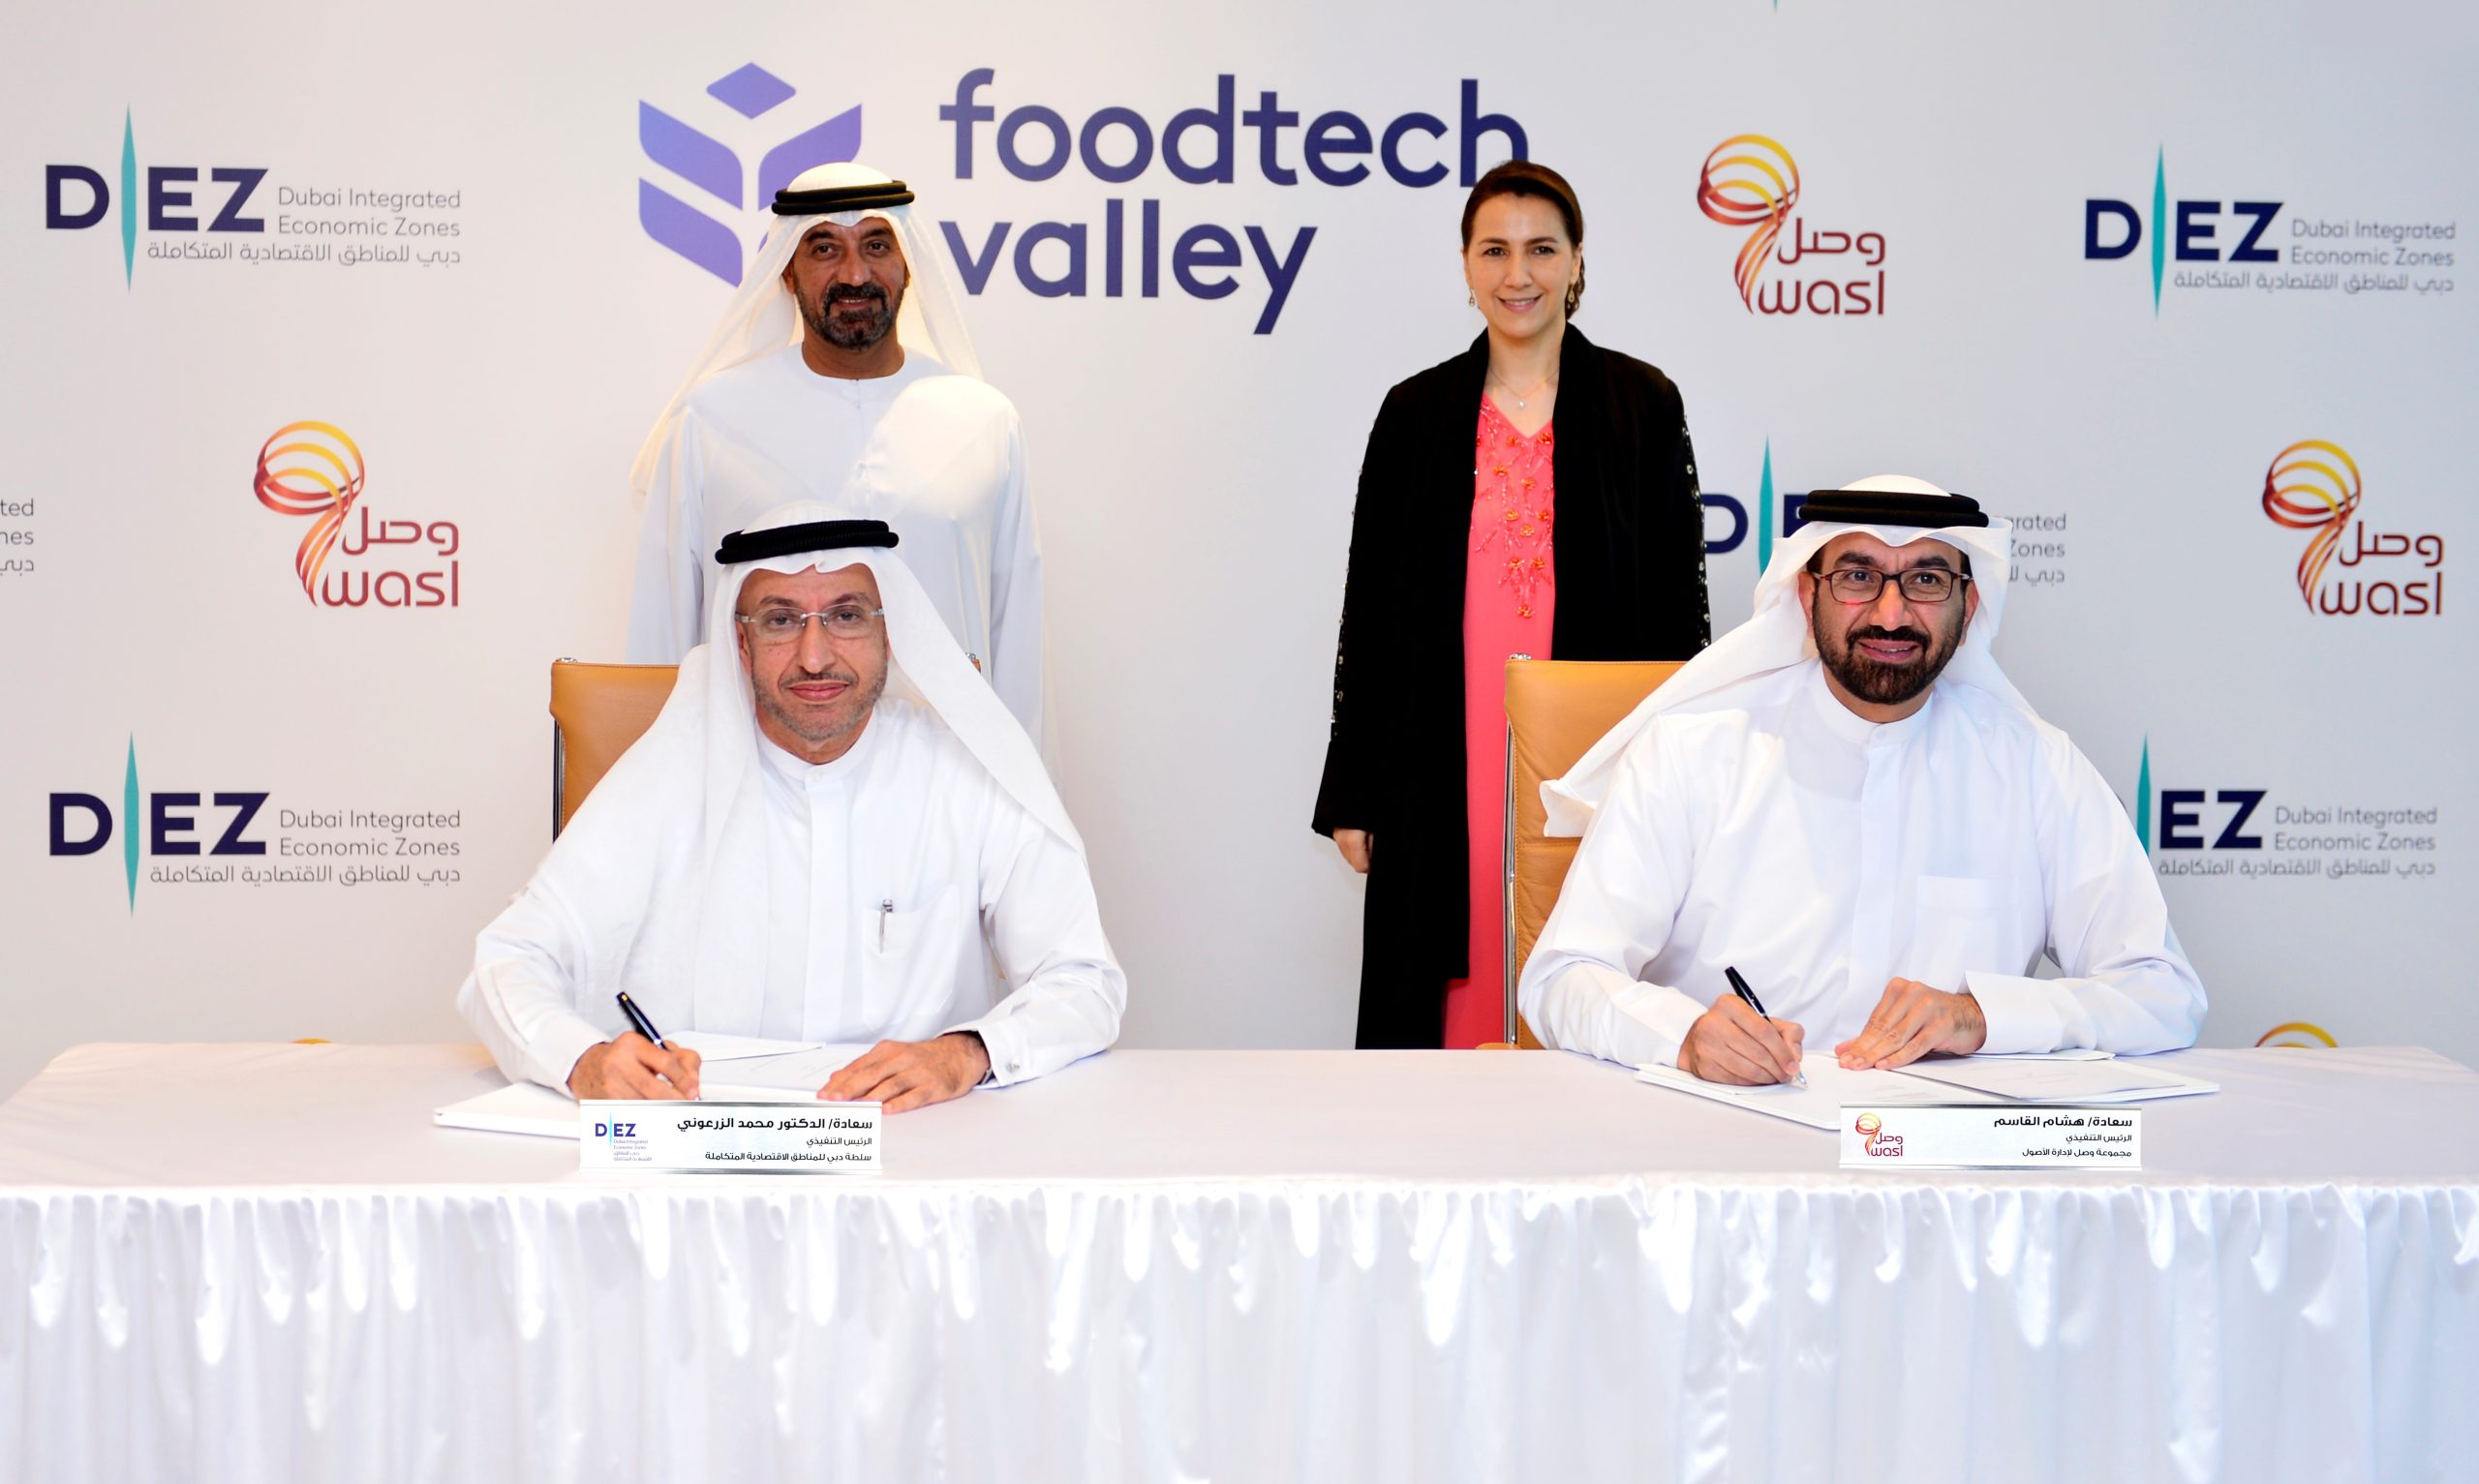 In the presence of Ahmed bin Saeed, wasl Asset Management Group and Dubai Integrated Economic Zones Authority sign MoU